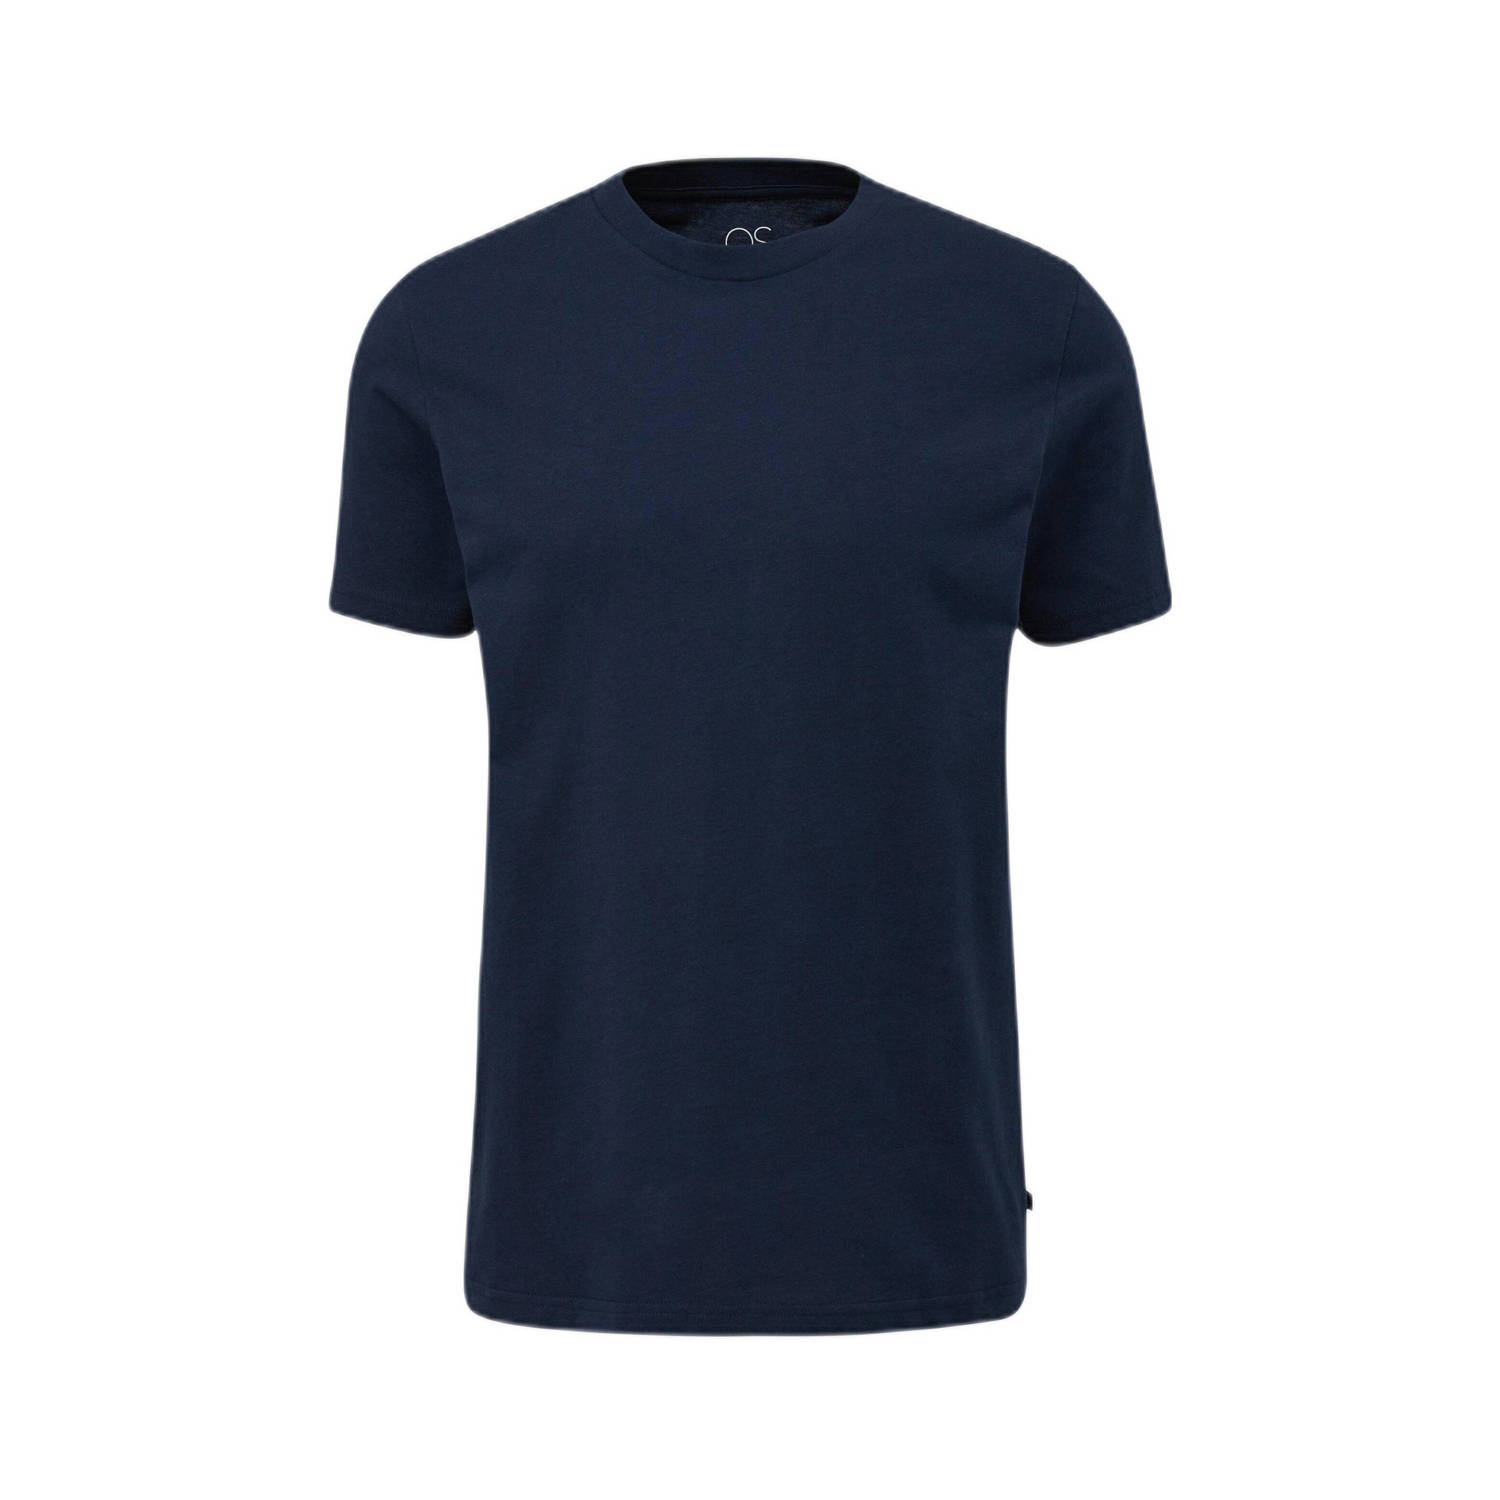 Q S by s.Oliver regular fit T-shirt marine